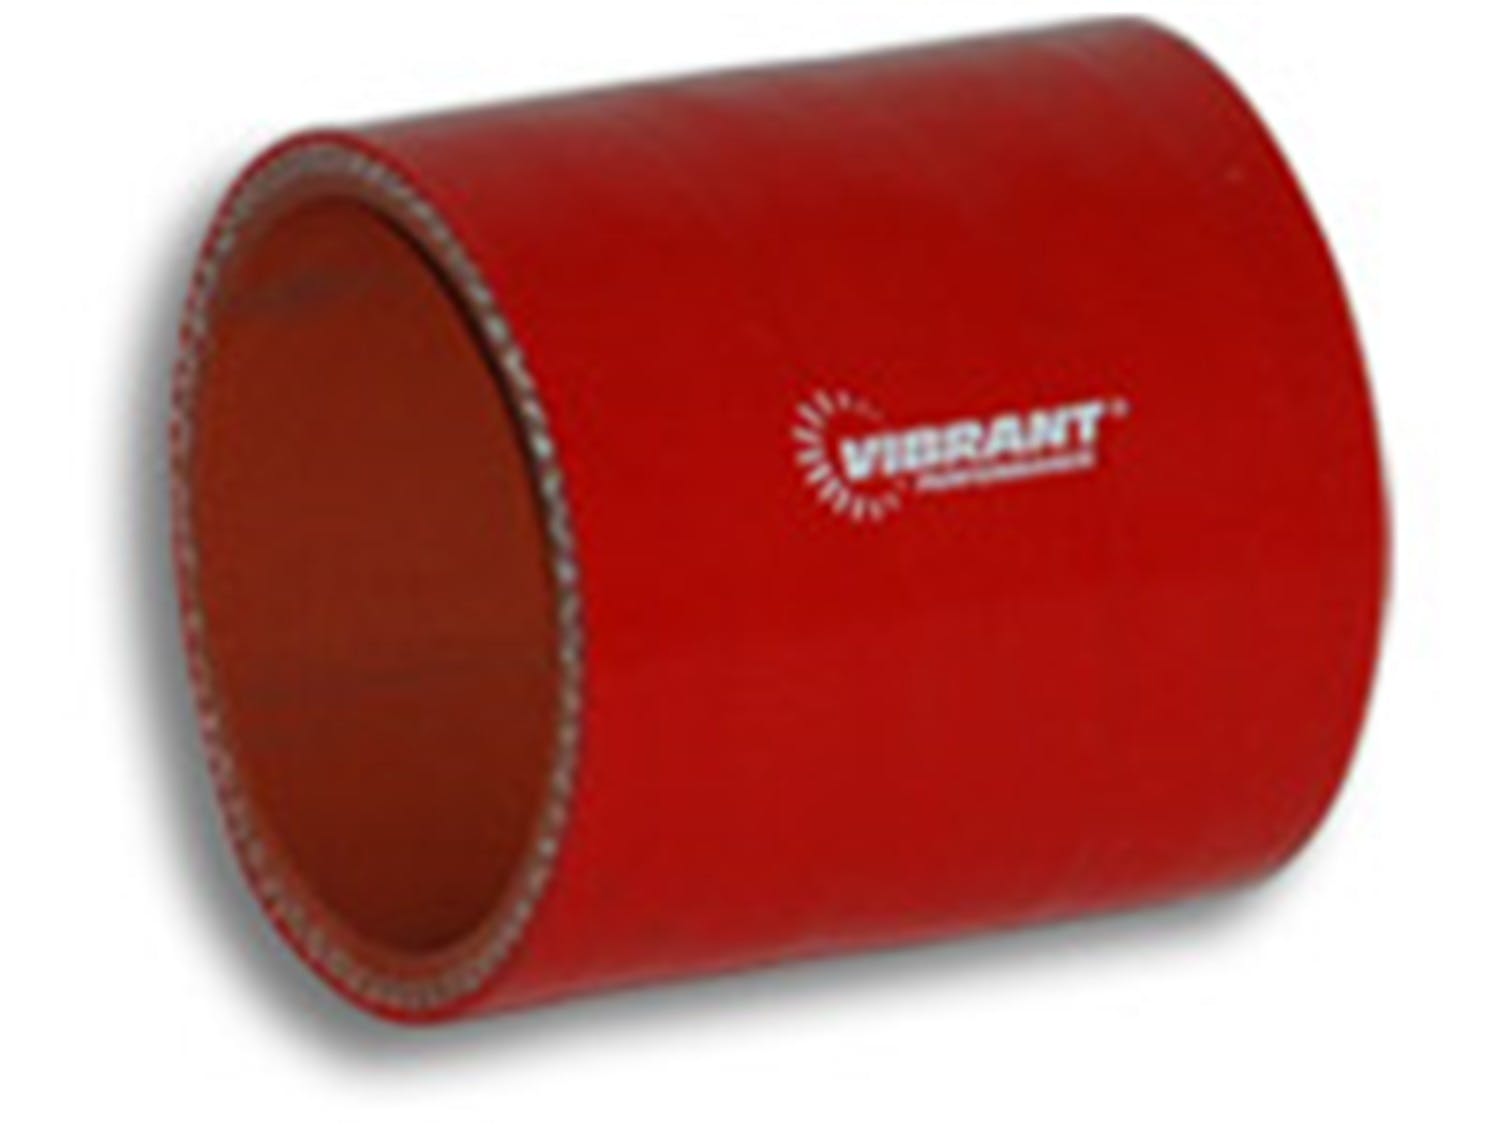 Vibrant Performance 2710R 4 Ply Silicone Sleeve, 2.5 inch I.D. x 3 inch Long - Red